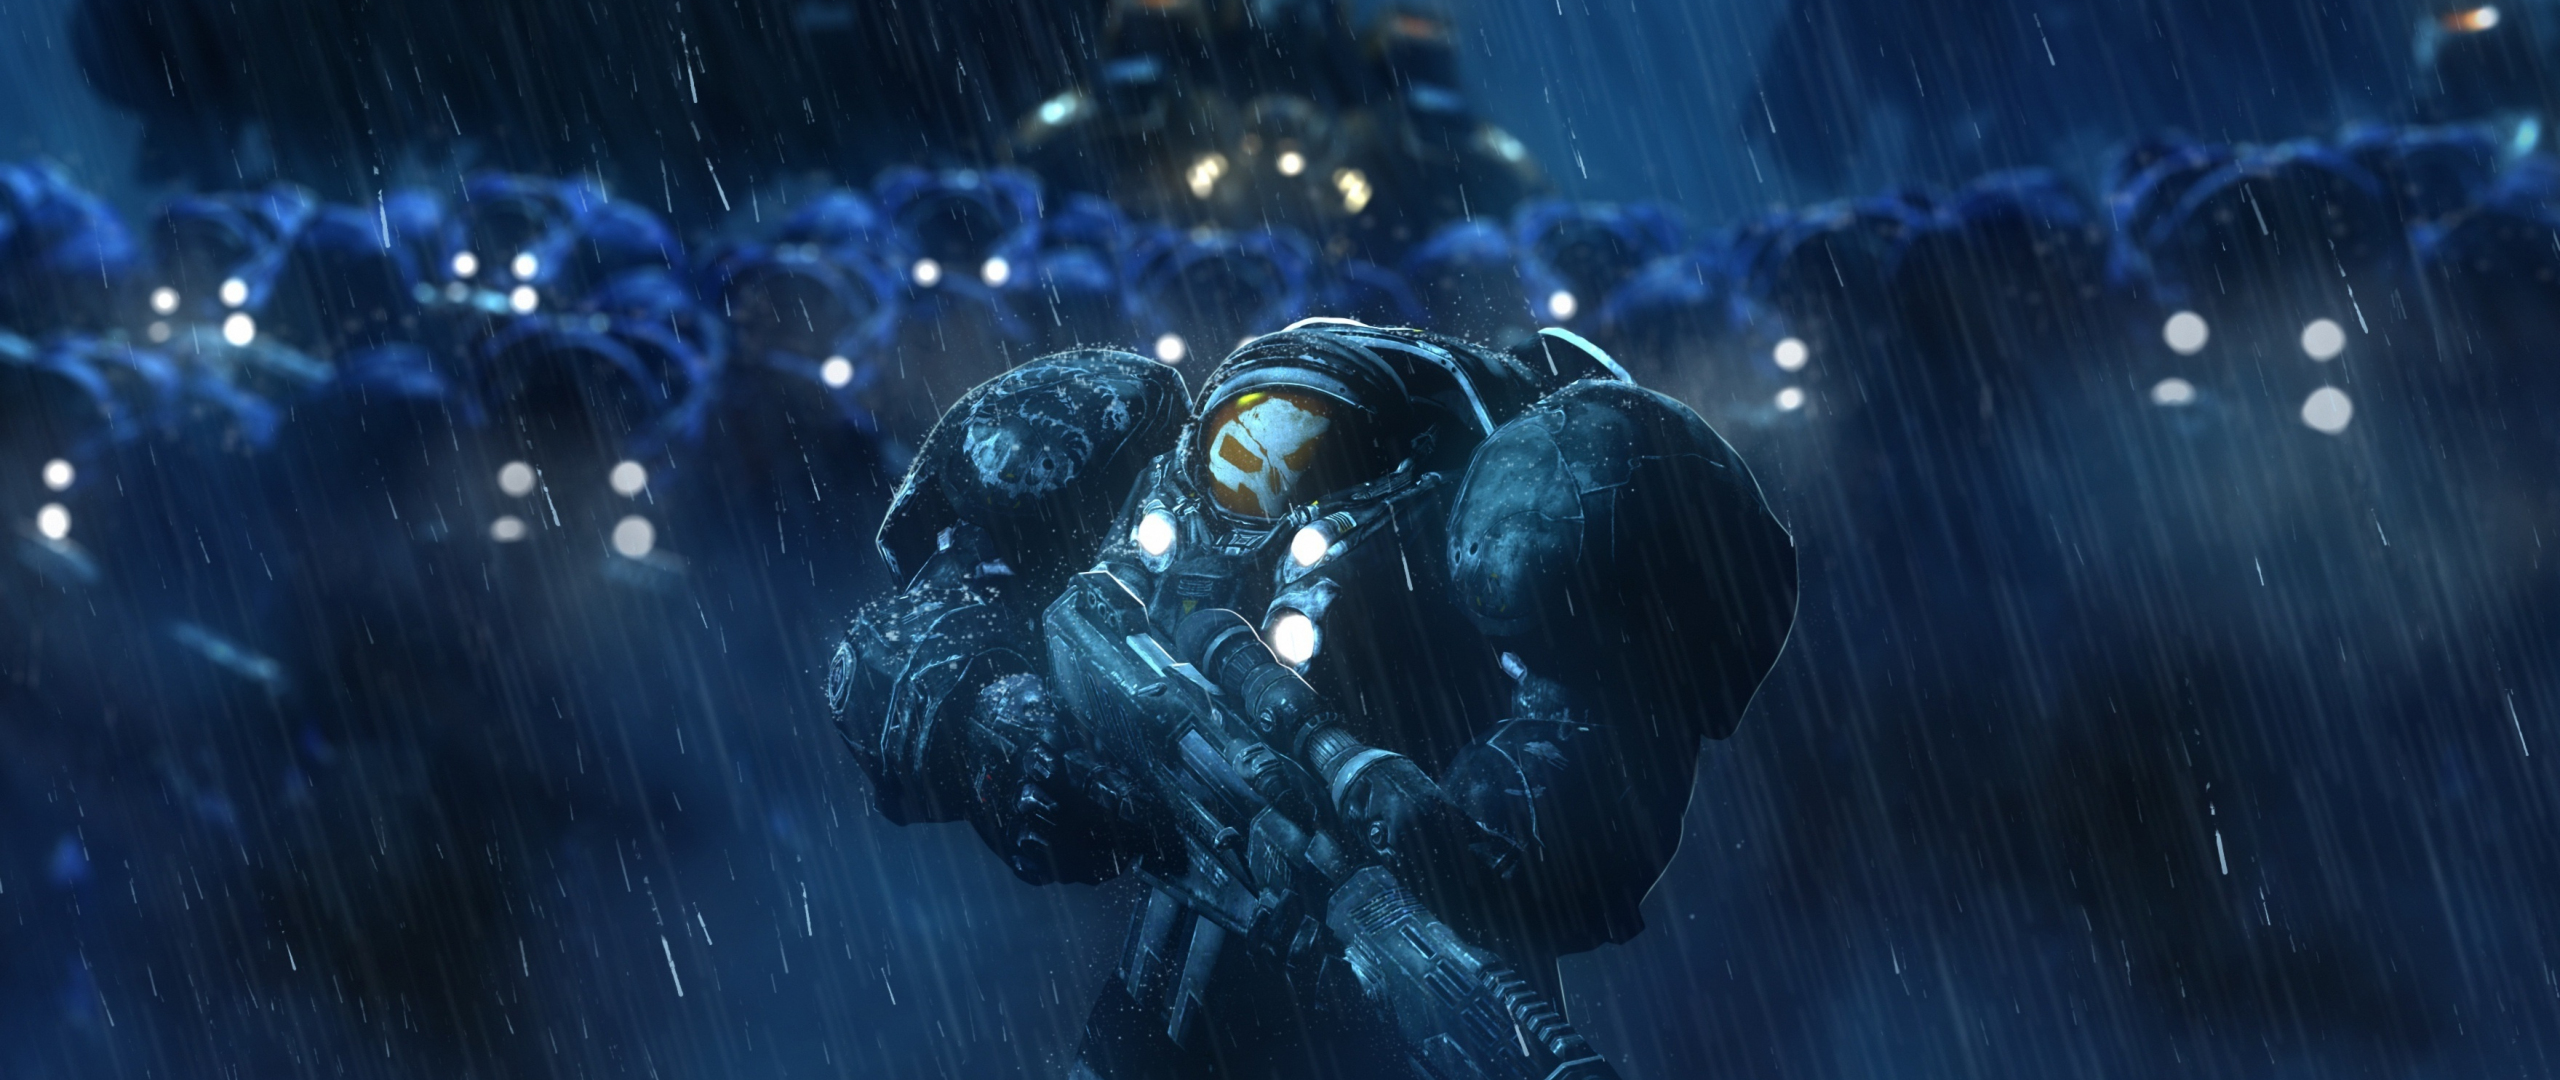 Download 2560x1080 Wallpaper Starcraft Remastered Soldiers Rain Video Game Dual Wide Widescreen 2560x1080 Hd Image Background 4405